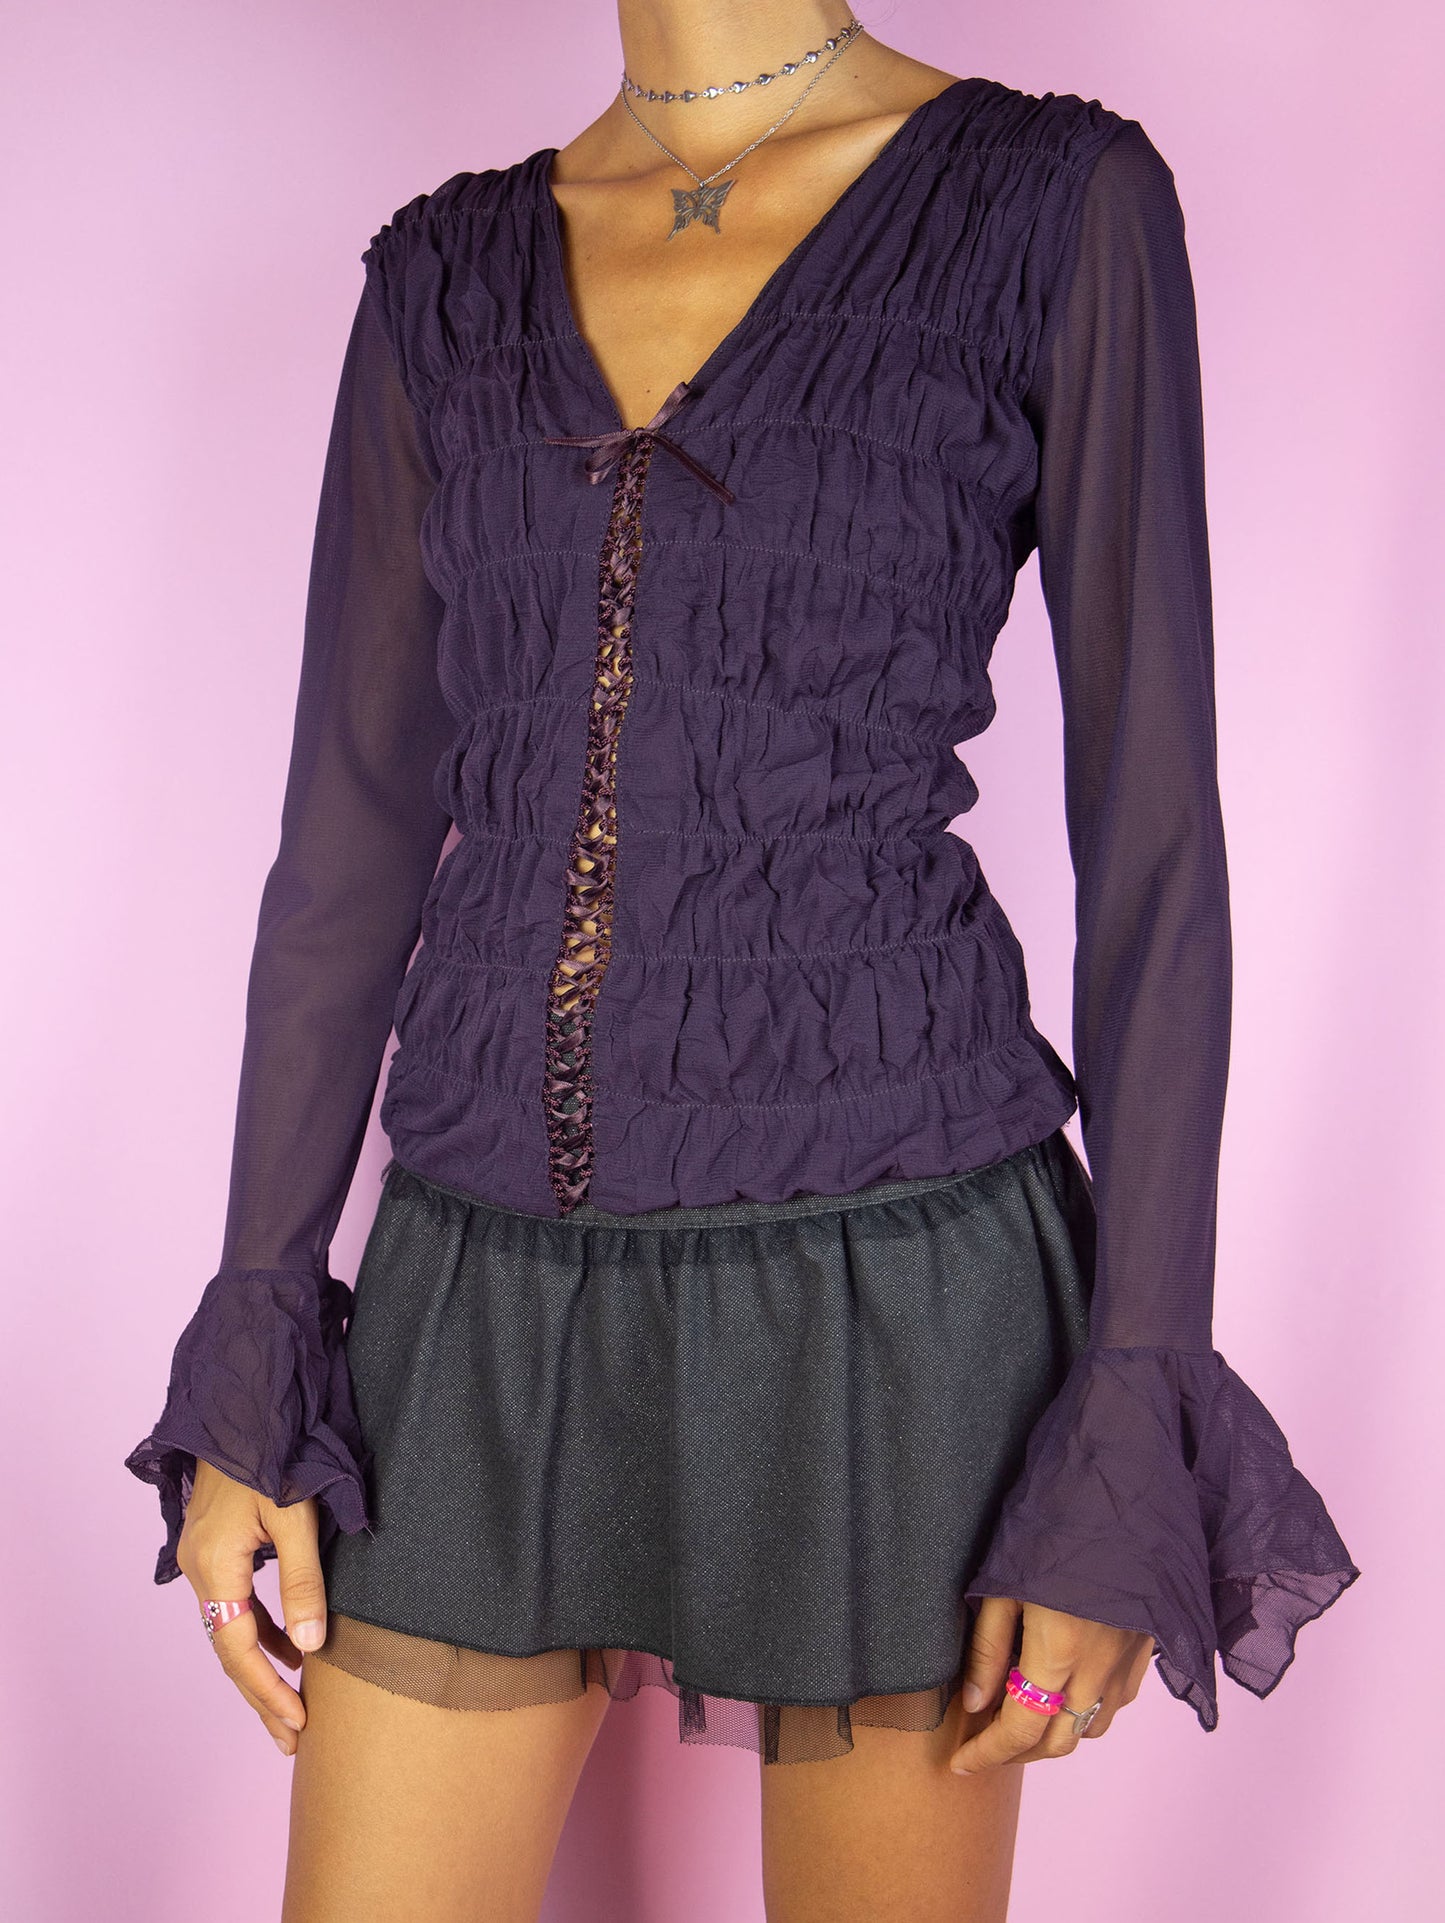 The Vintage Y2K Dark Purple Mesh Blouse is a long bell sleeve ruched semi-sheer mesh dark purple top with lace-up front. Gorgeous romantic fairy grunge whimsygoth shirt circa 2000's.